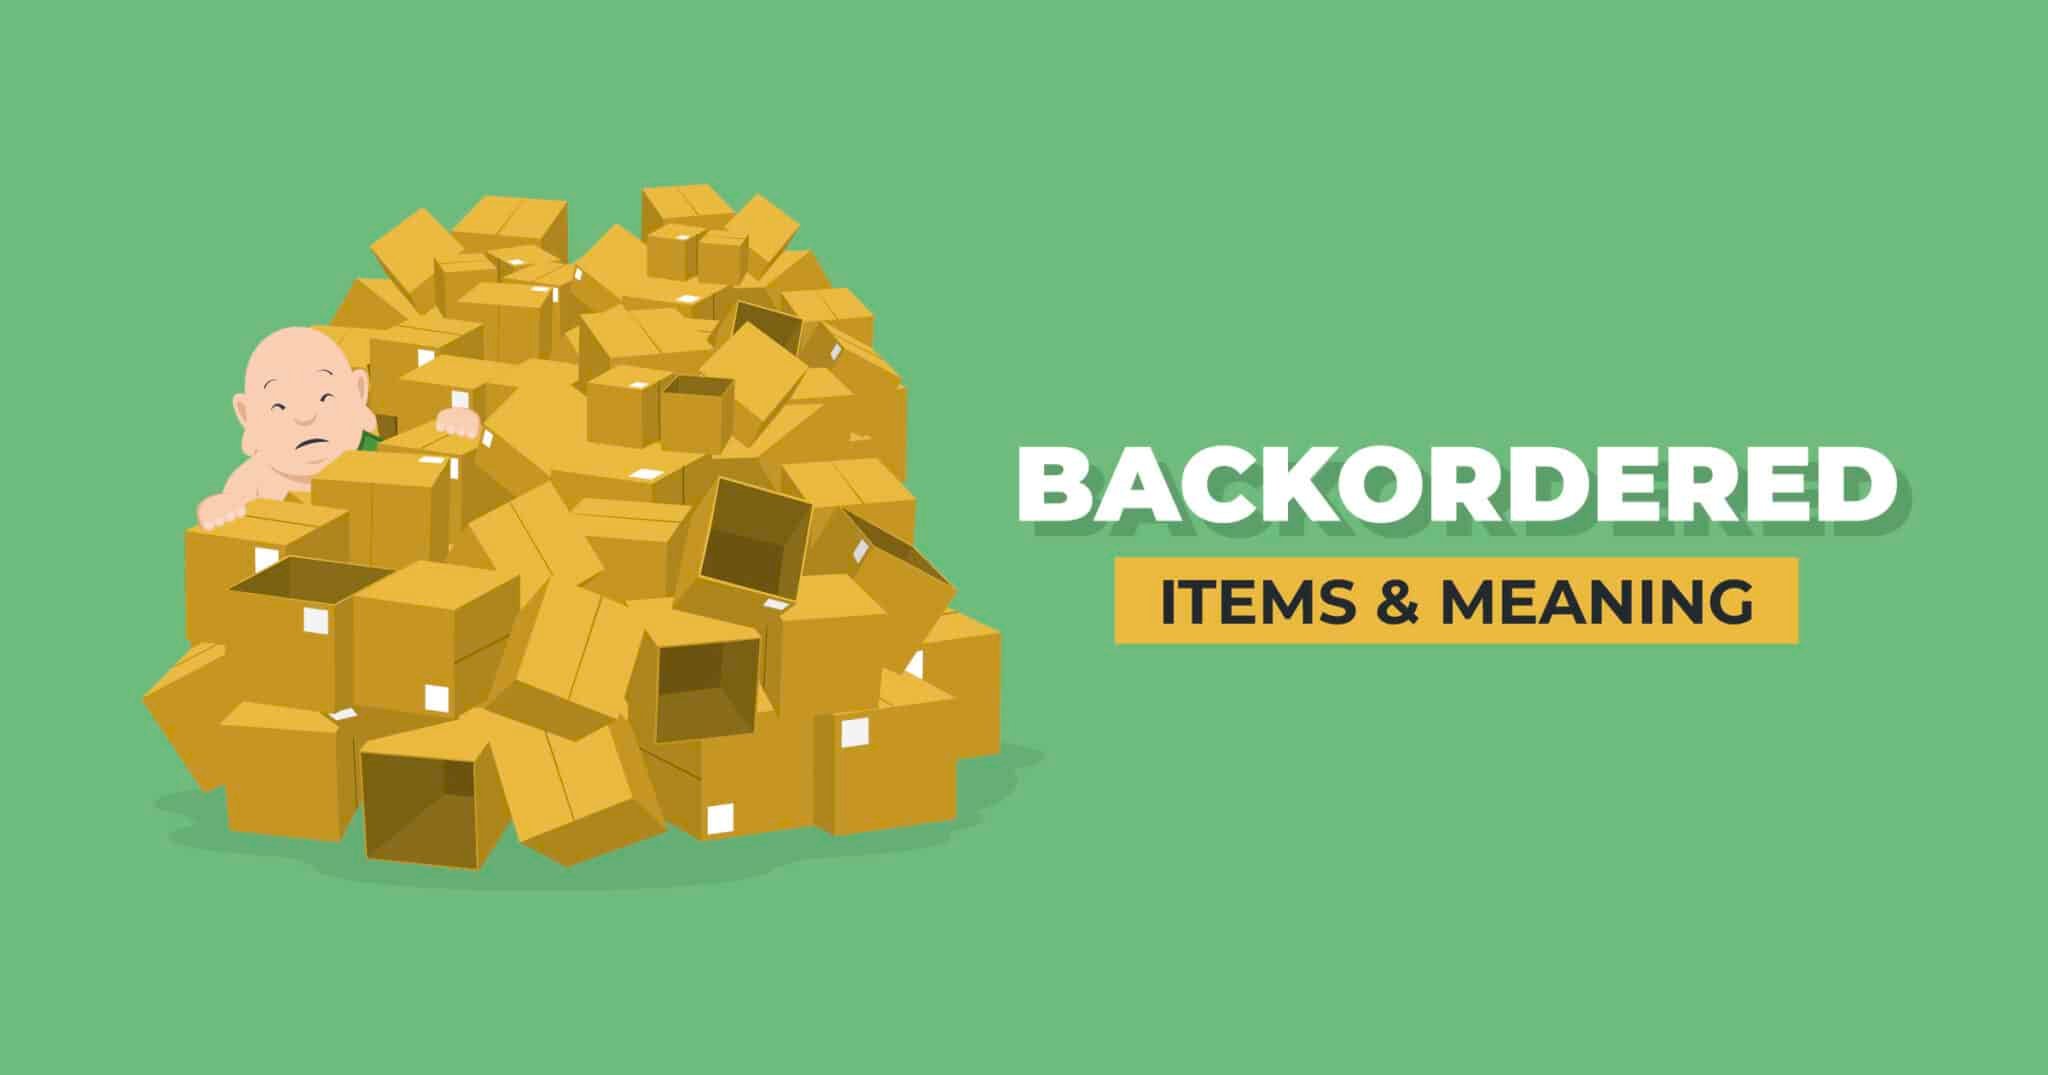 Backordered Items & Meaning